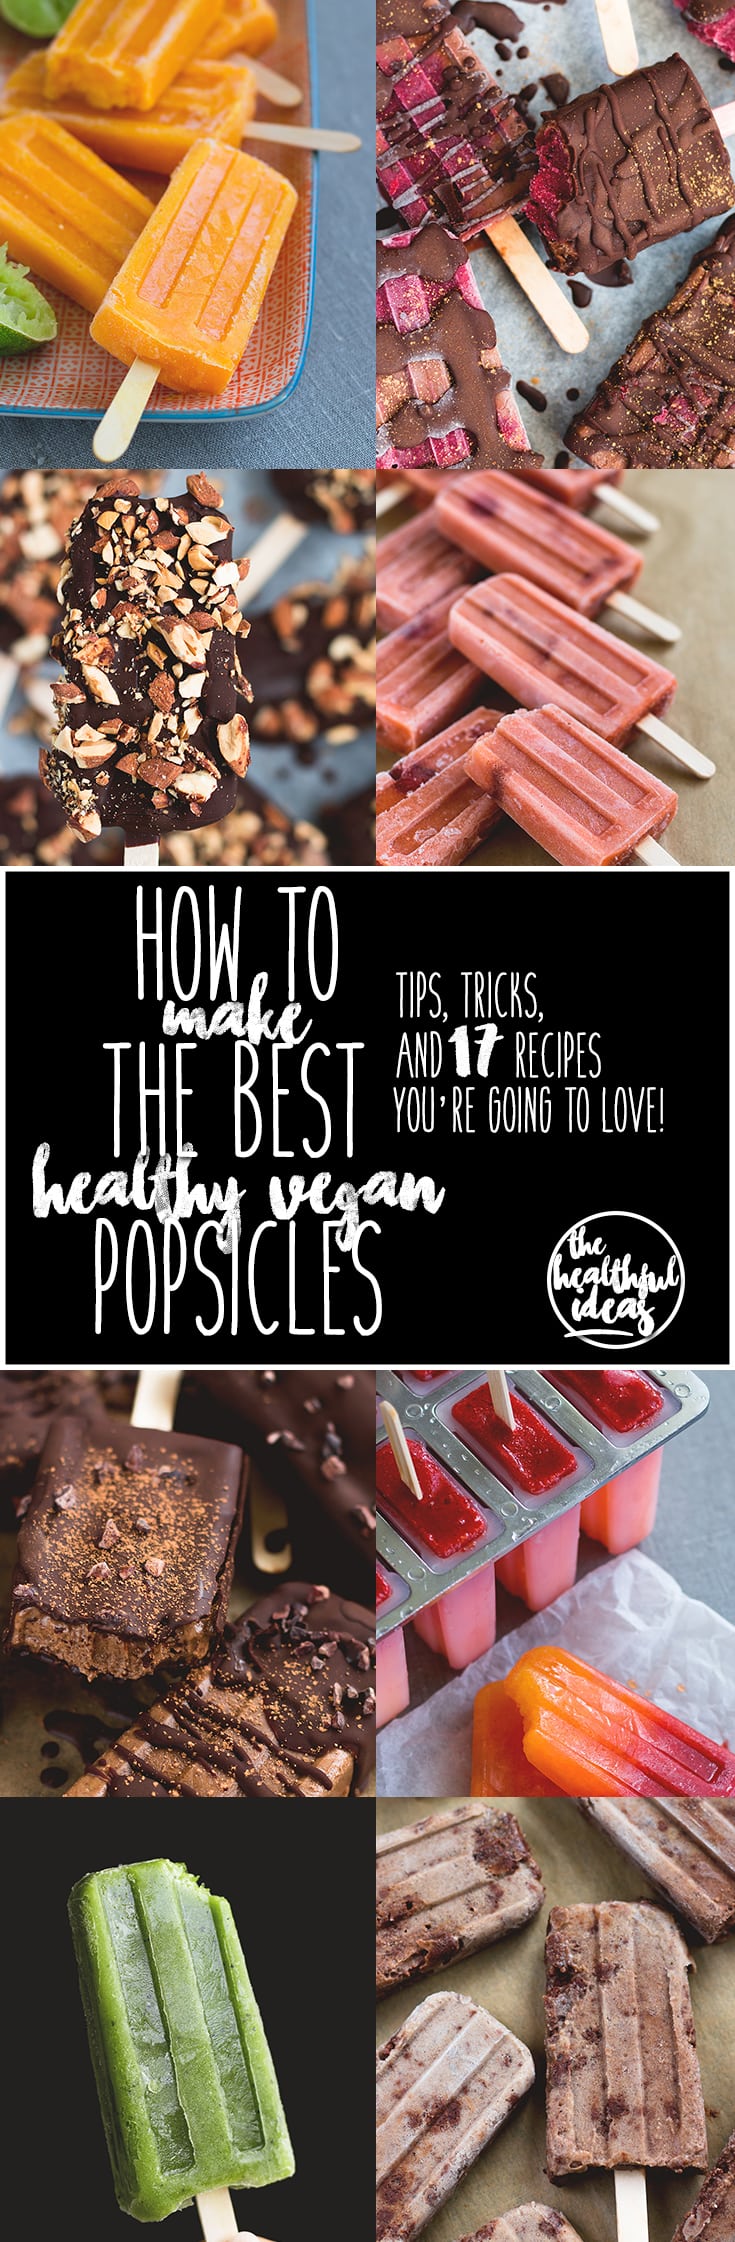 HHow to Make the Best Healthy Vegan Popsicles ebook - 16 delicious popsicle recipes plus 1 BONUS Raw Chocolate Sauce recipe! Easy, simple, sweet, and perfect for this summer!| thehealthfulideas.com